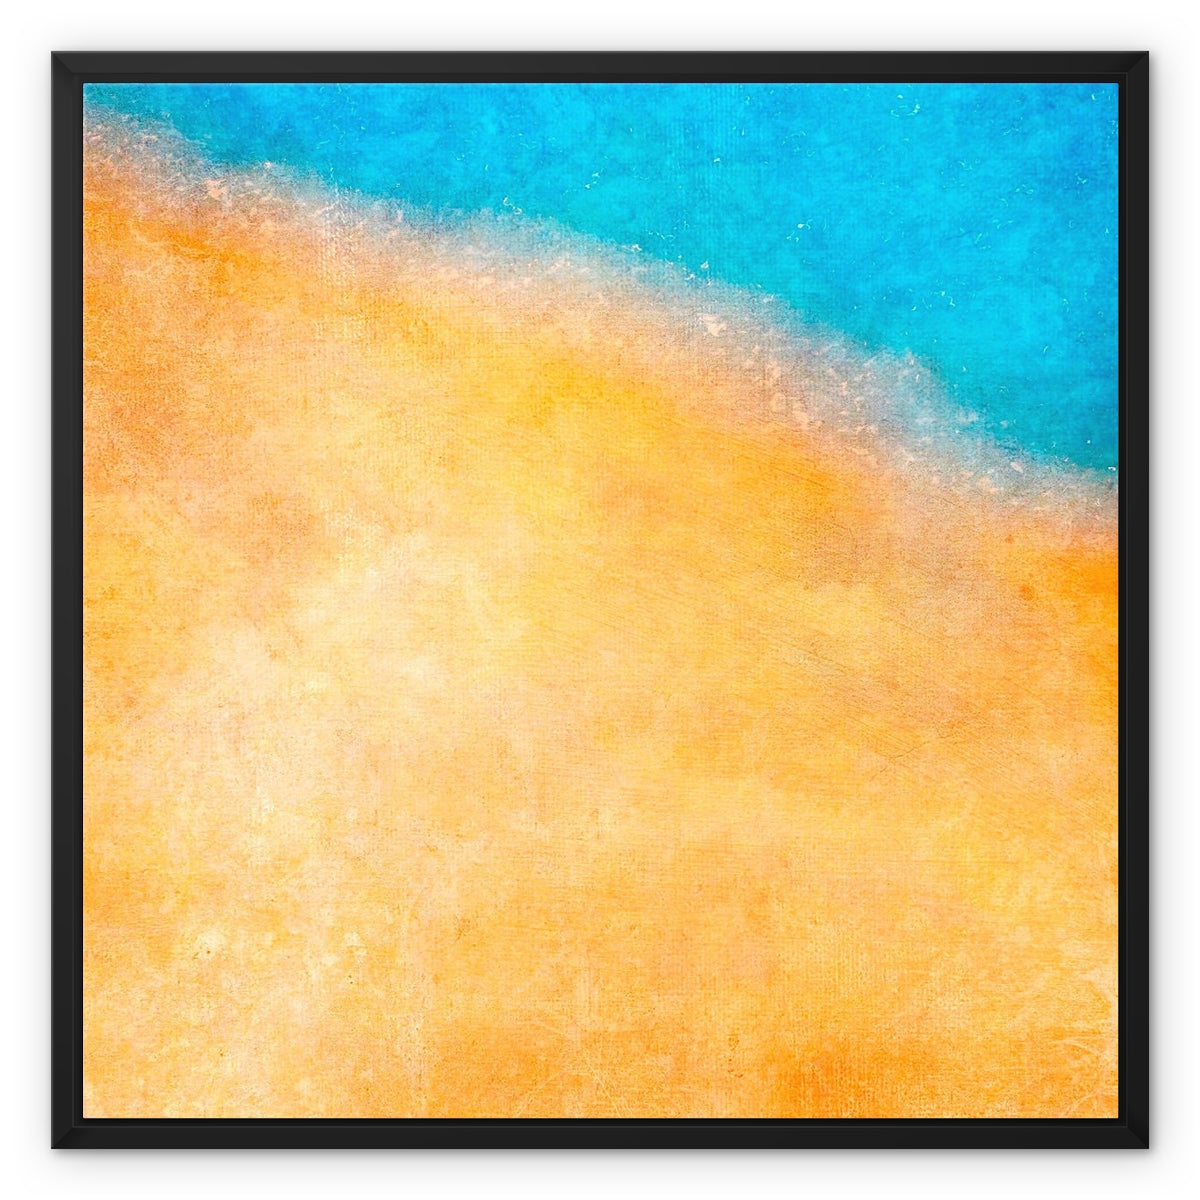 The Shoreline Abstract Painting | Framed Canvas From Scotland-Floating Framed Canvas Prints-Abstract & Impressionistic Art Gallery-24"x24"-Black Frame-Paintings, Prints, Homeware, Art Gifts From Scotland By Scottish Artist Kevin Hunter